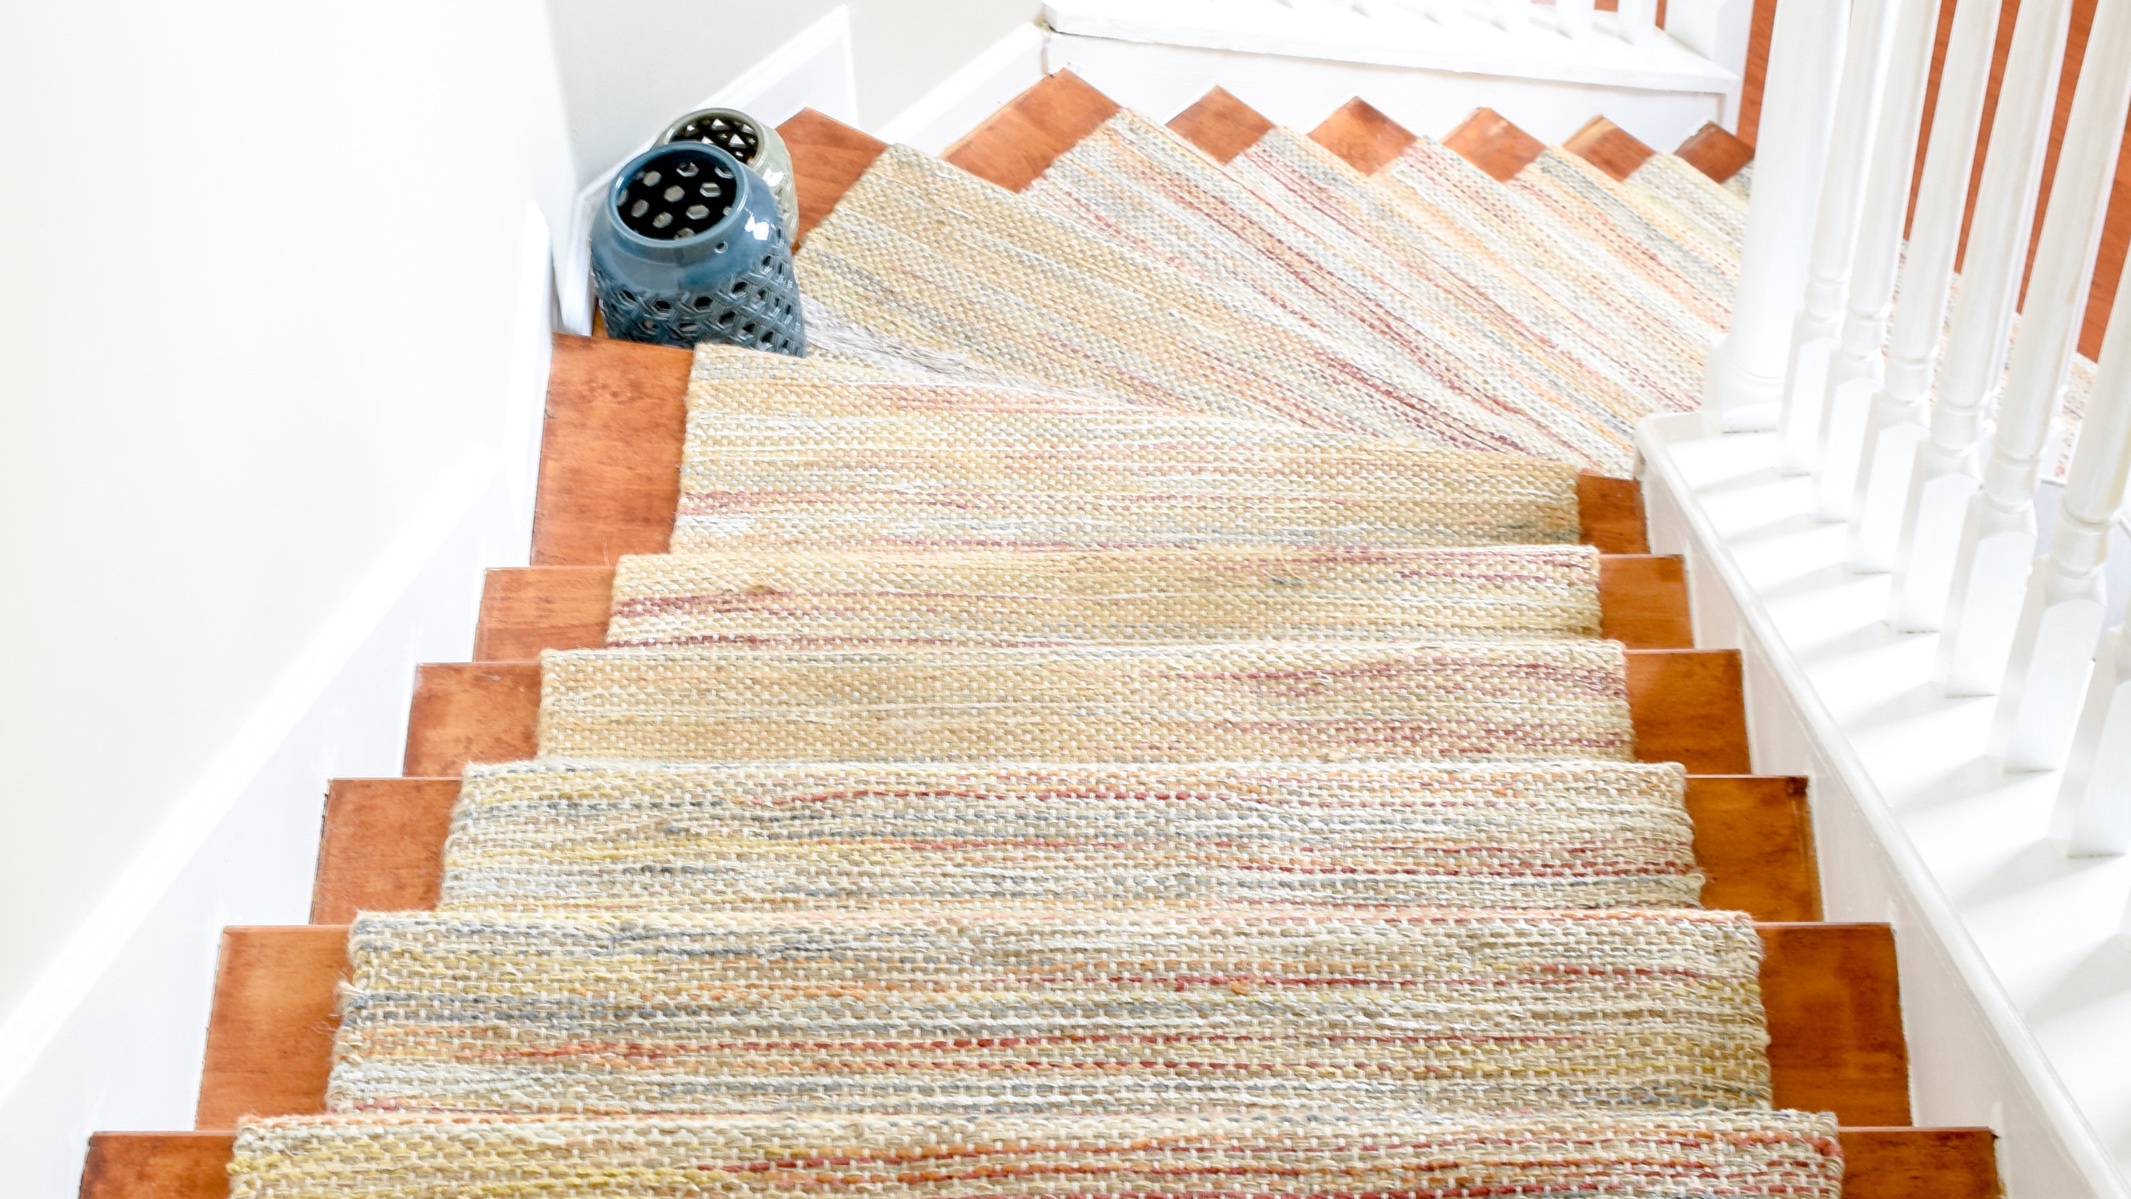 Replacing Carpet With Wood Treads, How To Make Stair Treads From Hardwood Flooring